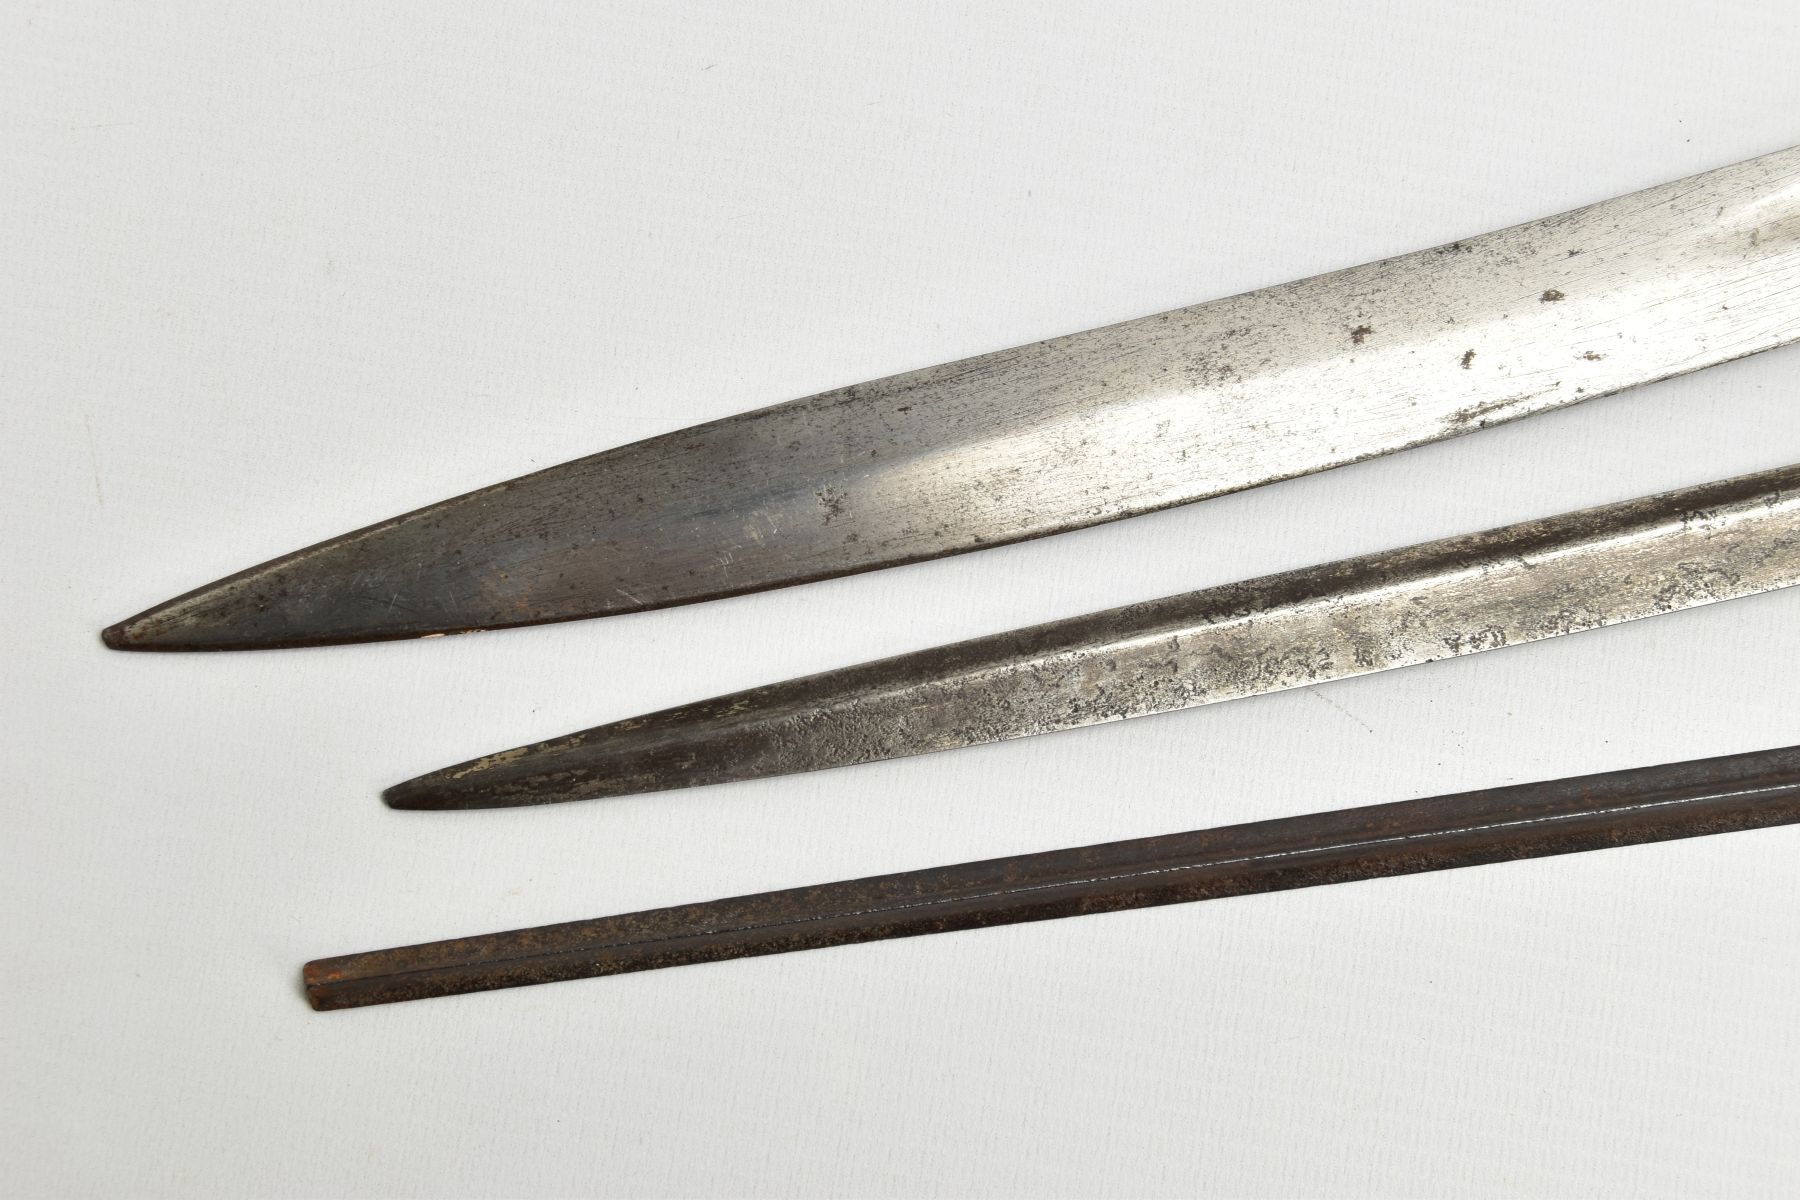 THREE SWORDS BELIEVED 19TH Century, a white metal ornate grip and cross guard blade tip broken, - Image 9 of 12